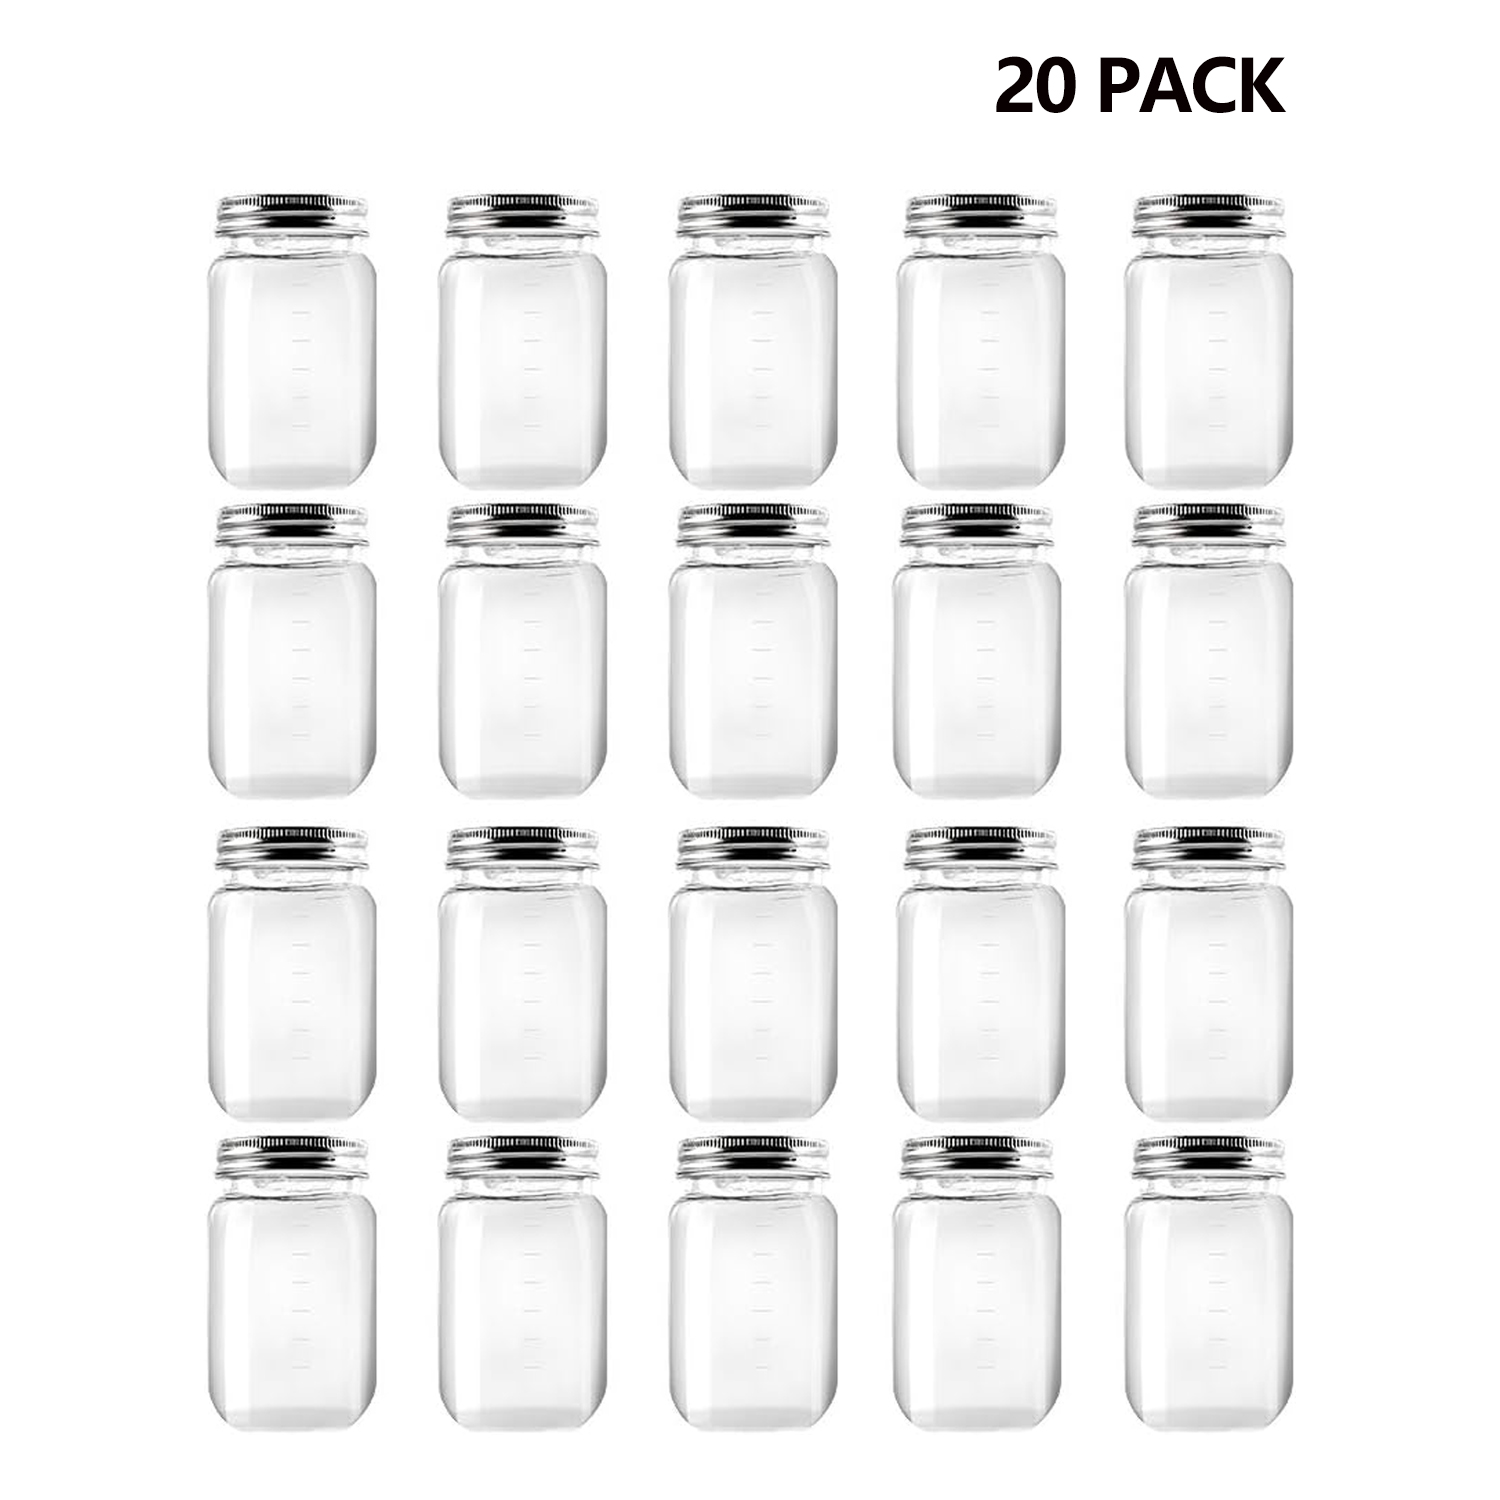 Novelinks 32oz Plastic Jars with Lids 6 Pack Clear Containers Airtight ...